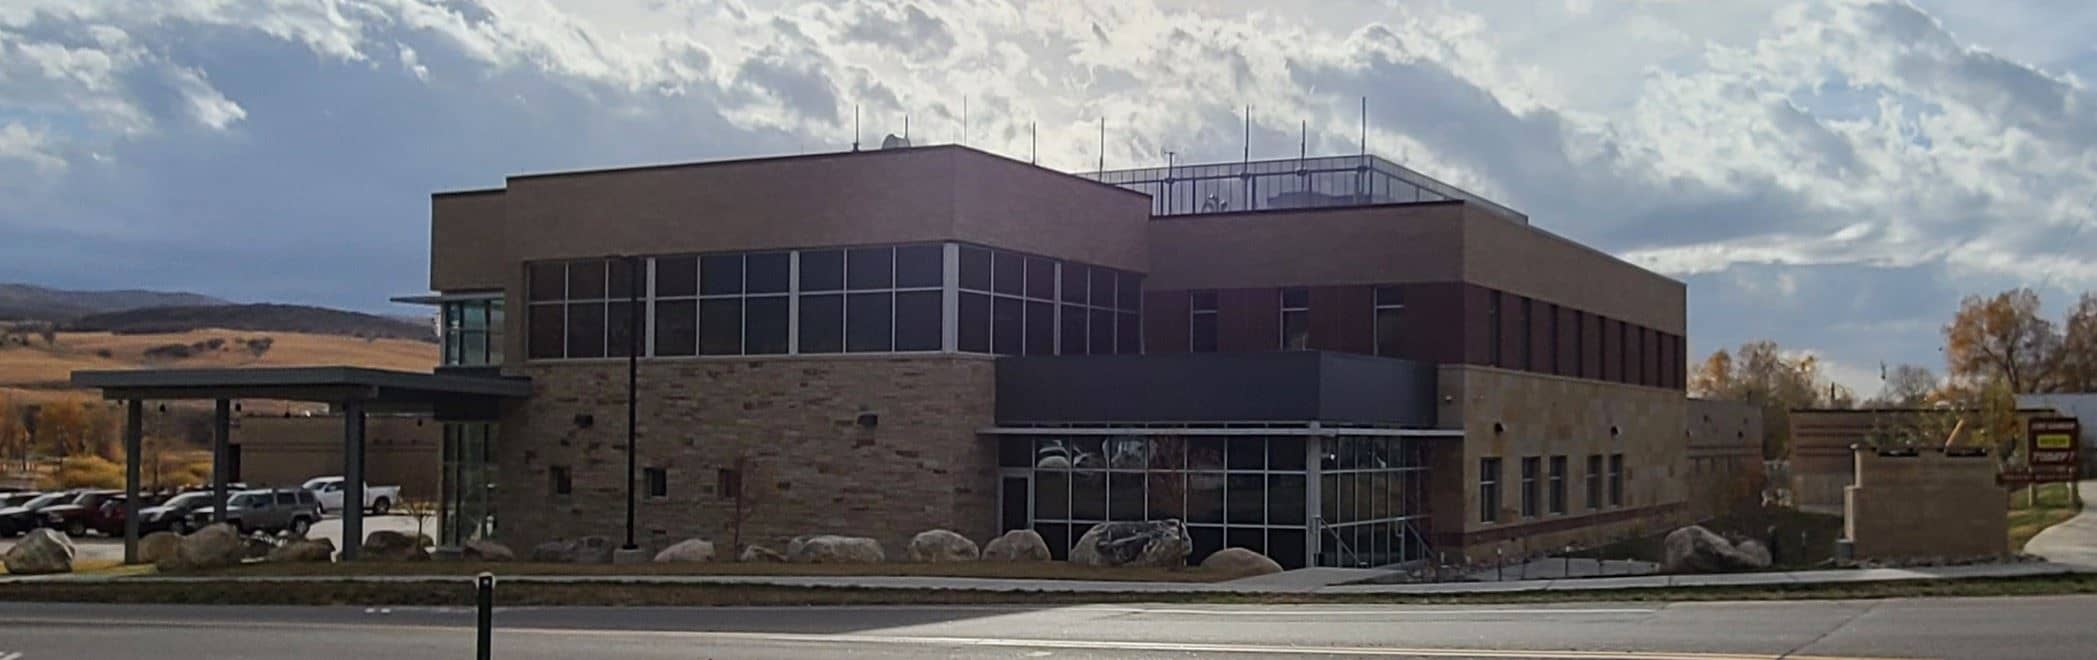 Image of Routt County Sheriff's Office